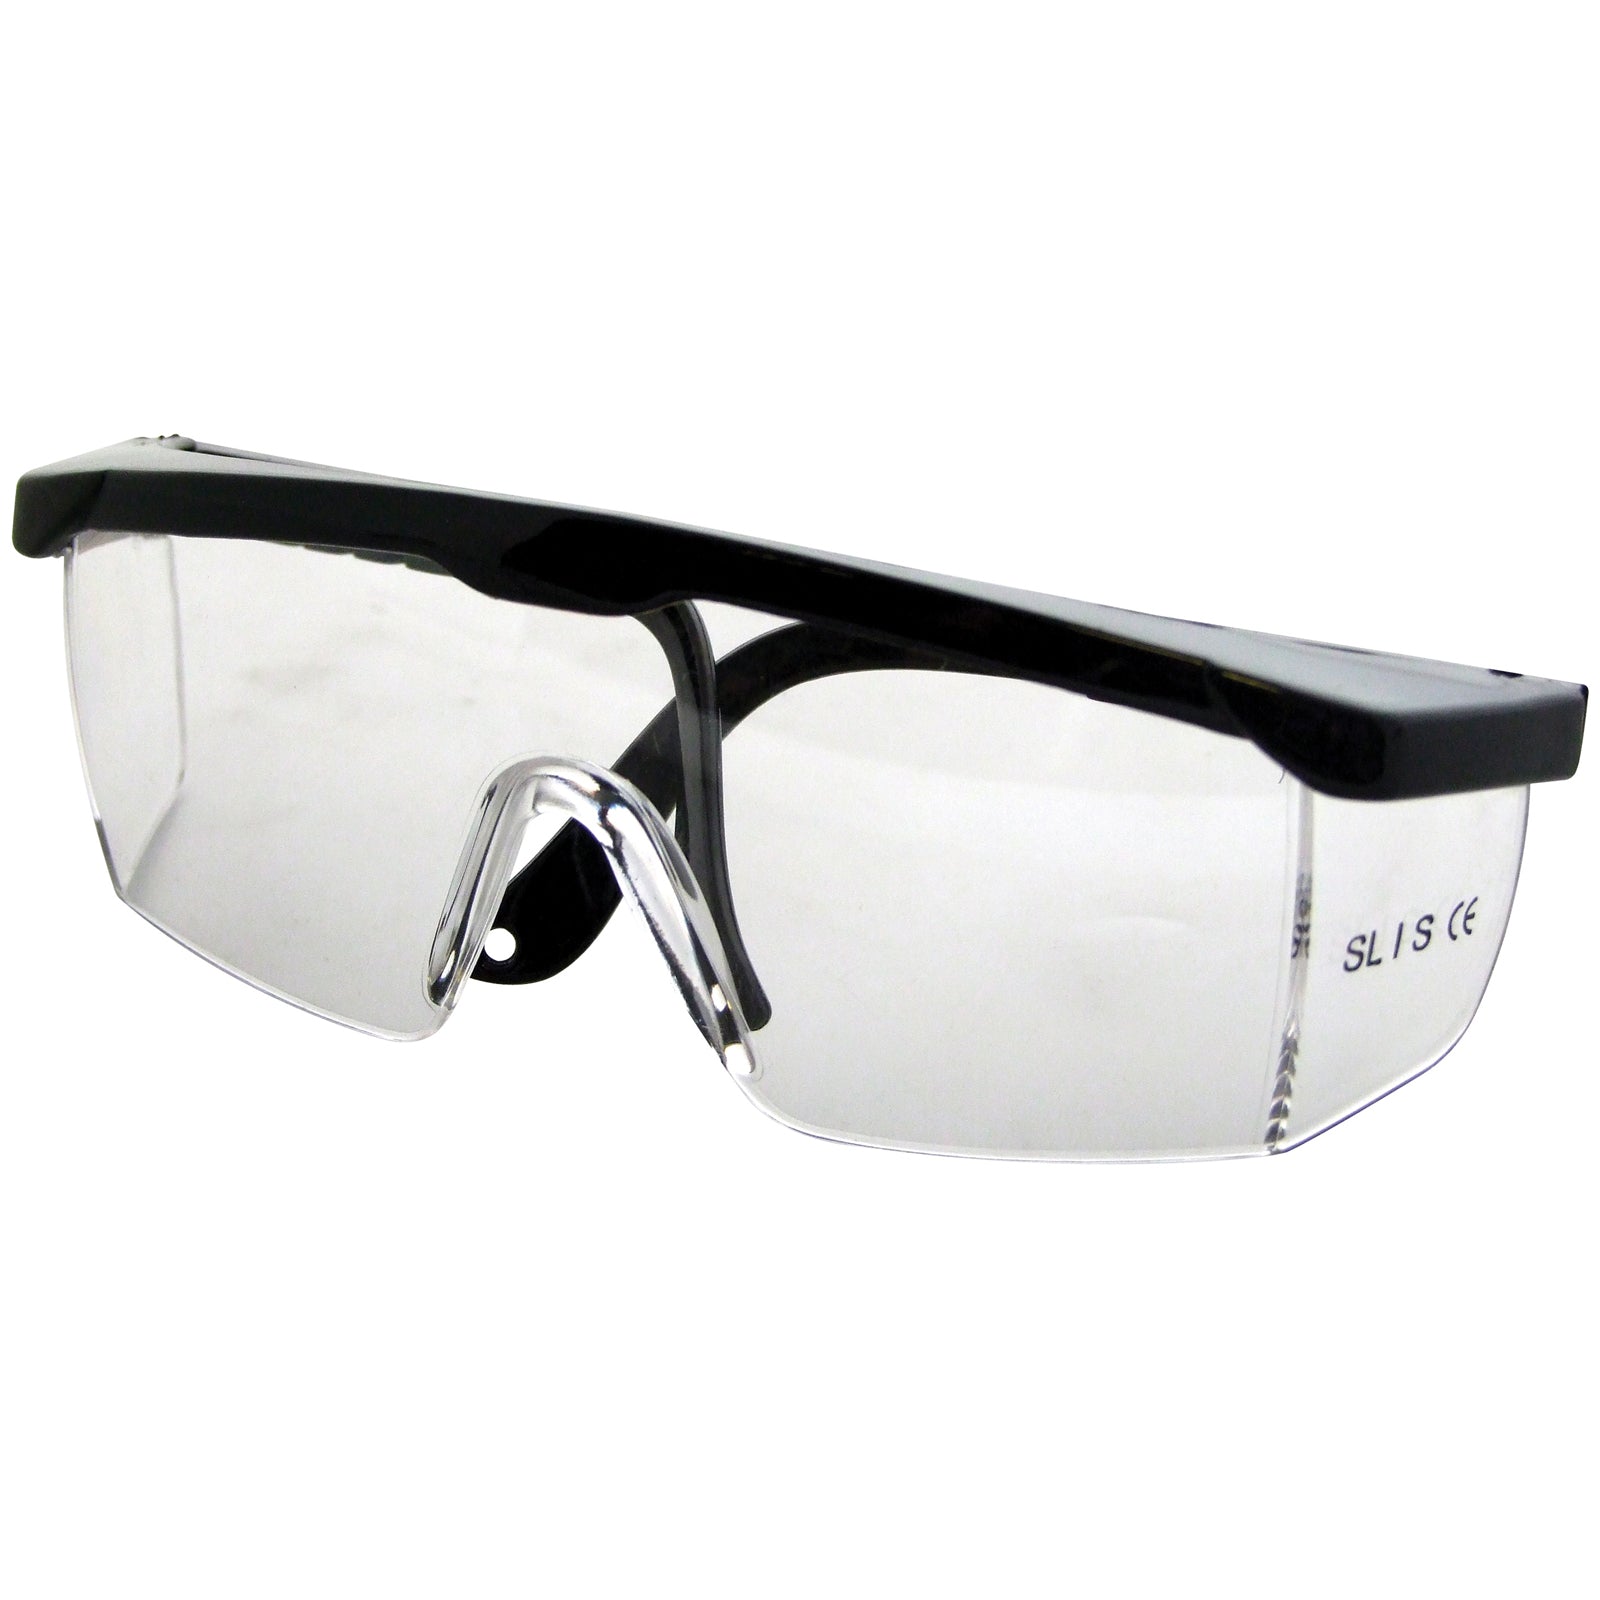 Amtech Safety Glasses Clear Lens PPE Eye Protection